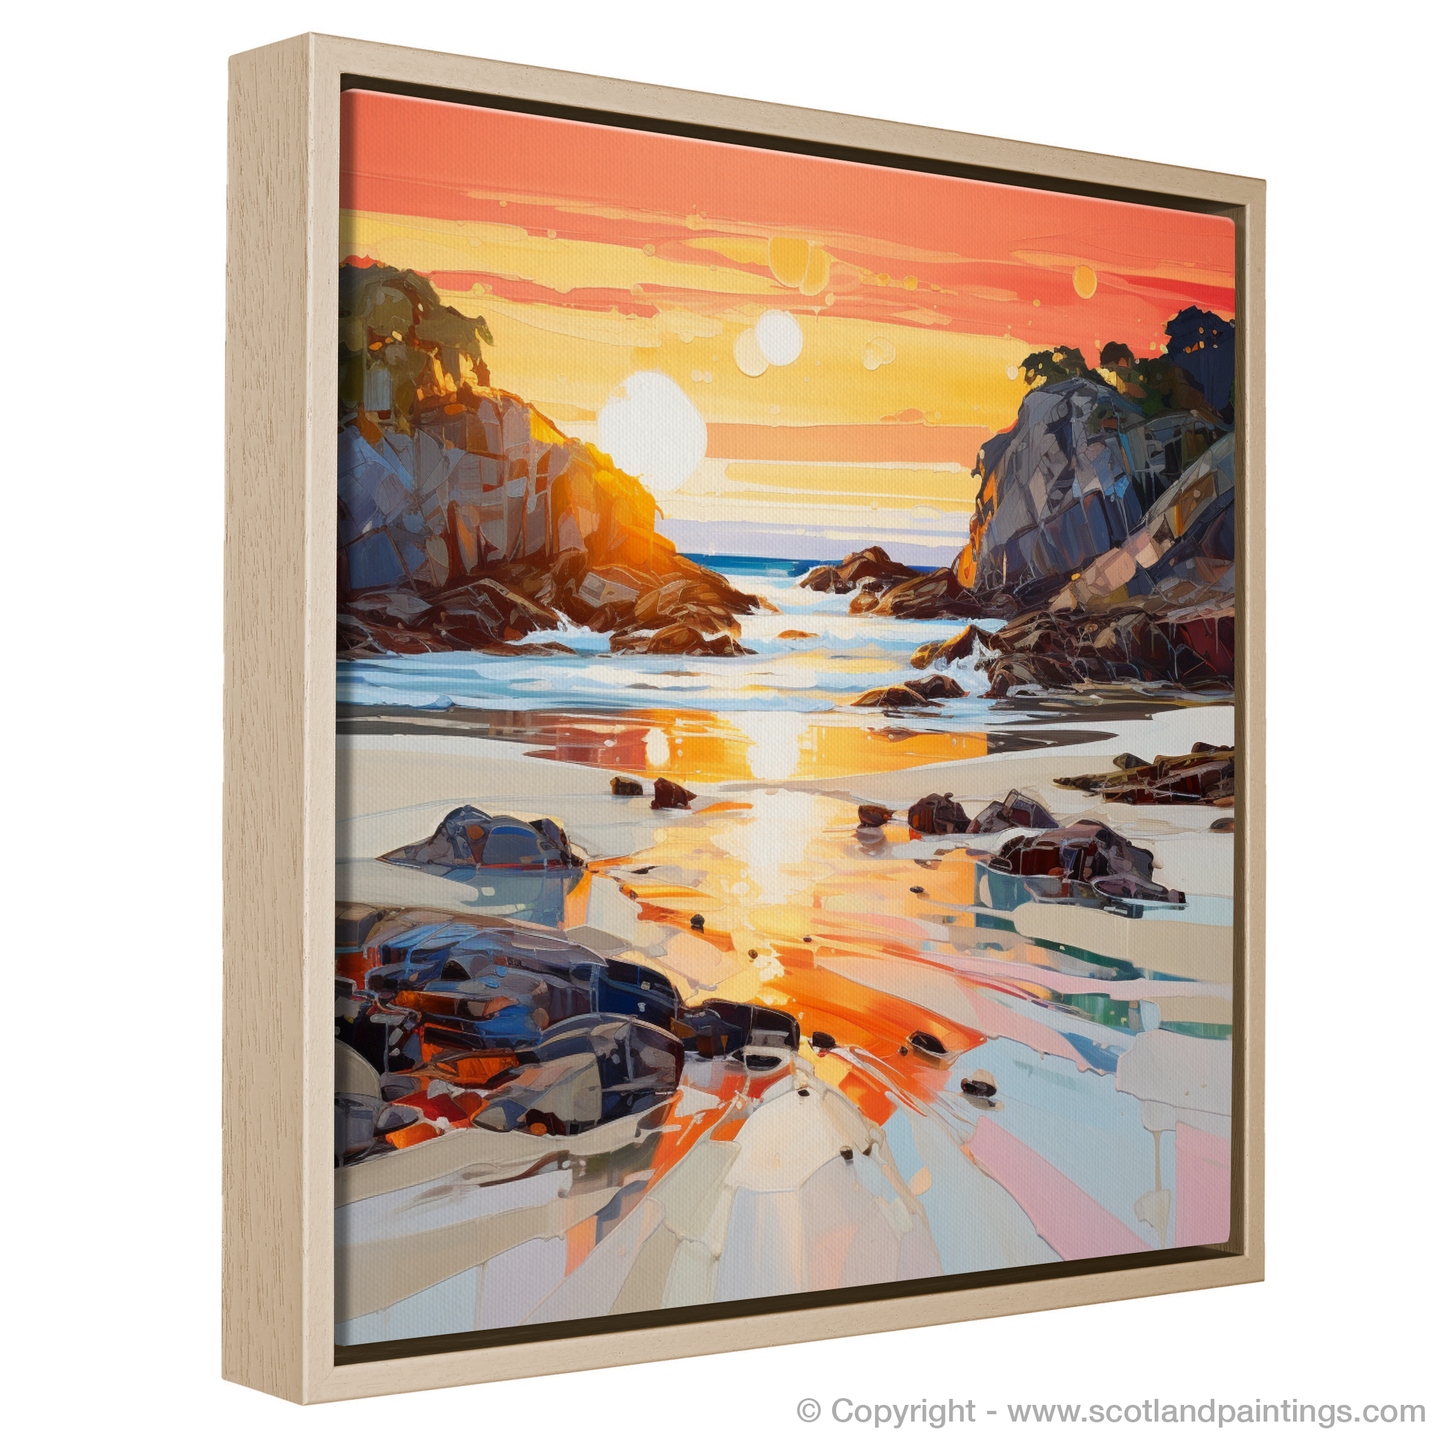 Painting and Art Print of Coral Beach at golden hour. Golden Hour at Coral Beach - An Expressionist Ode to Scotland's Shores.